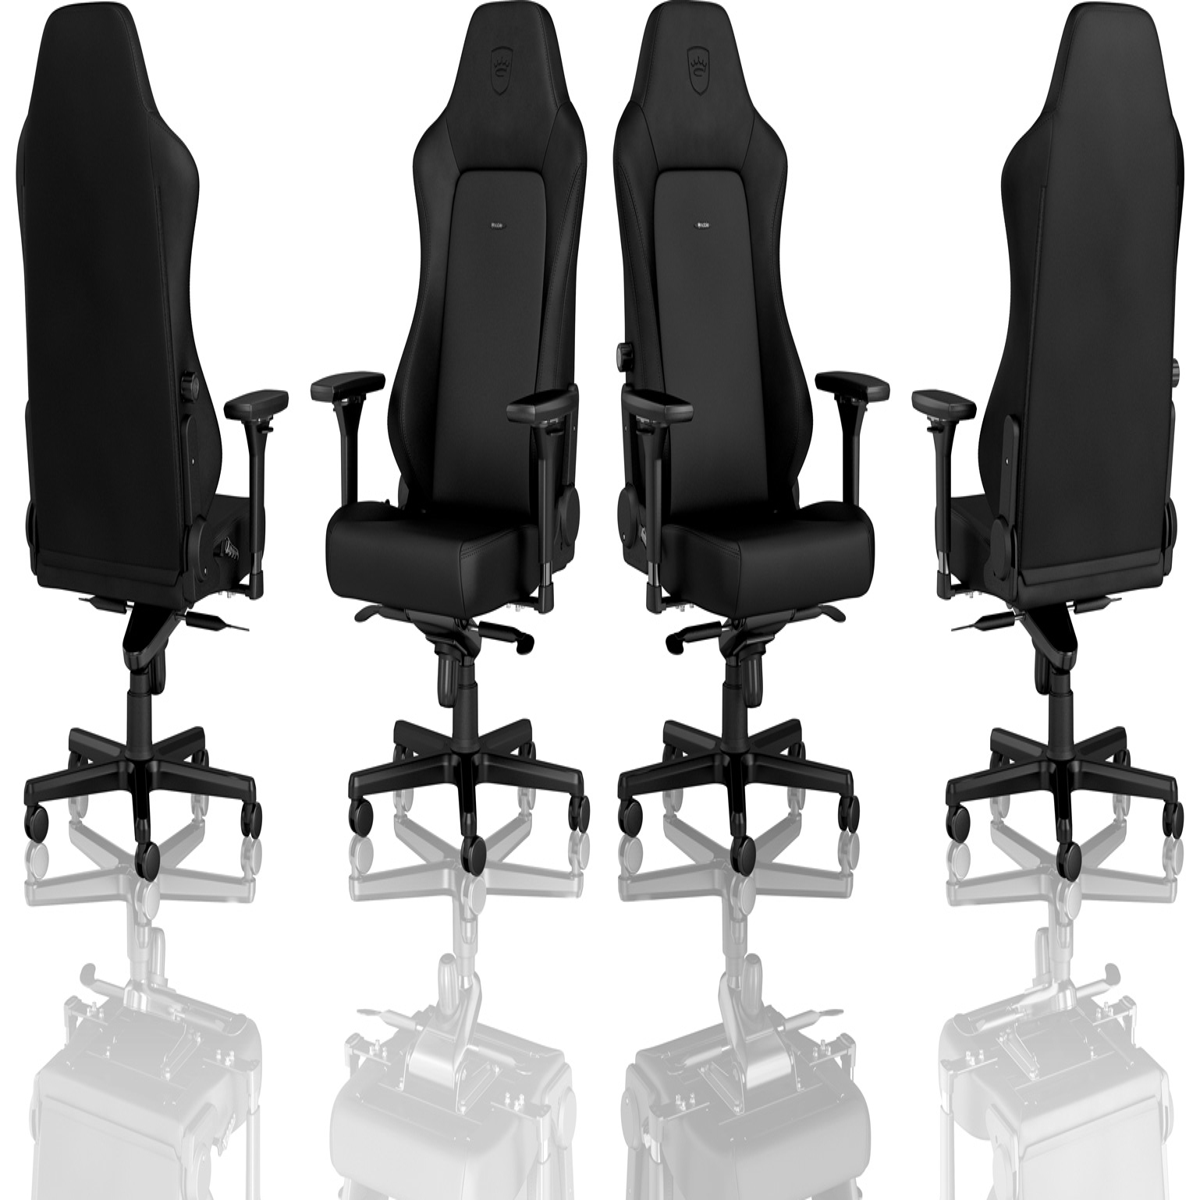 Noblechairs Hero Black Edition Gaming Chair Review, Shopping